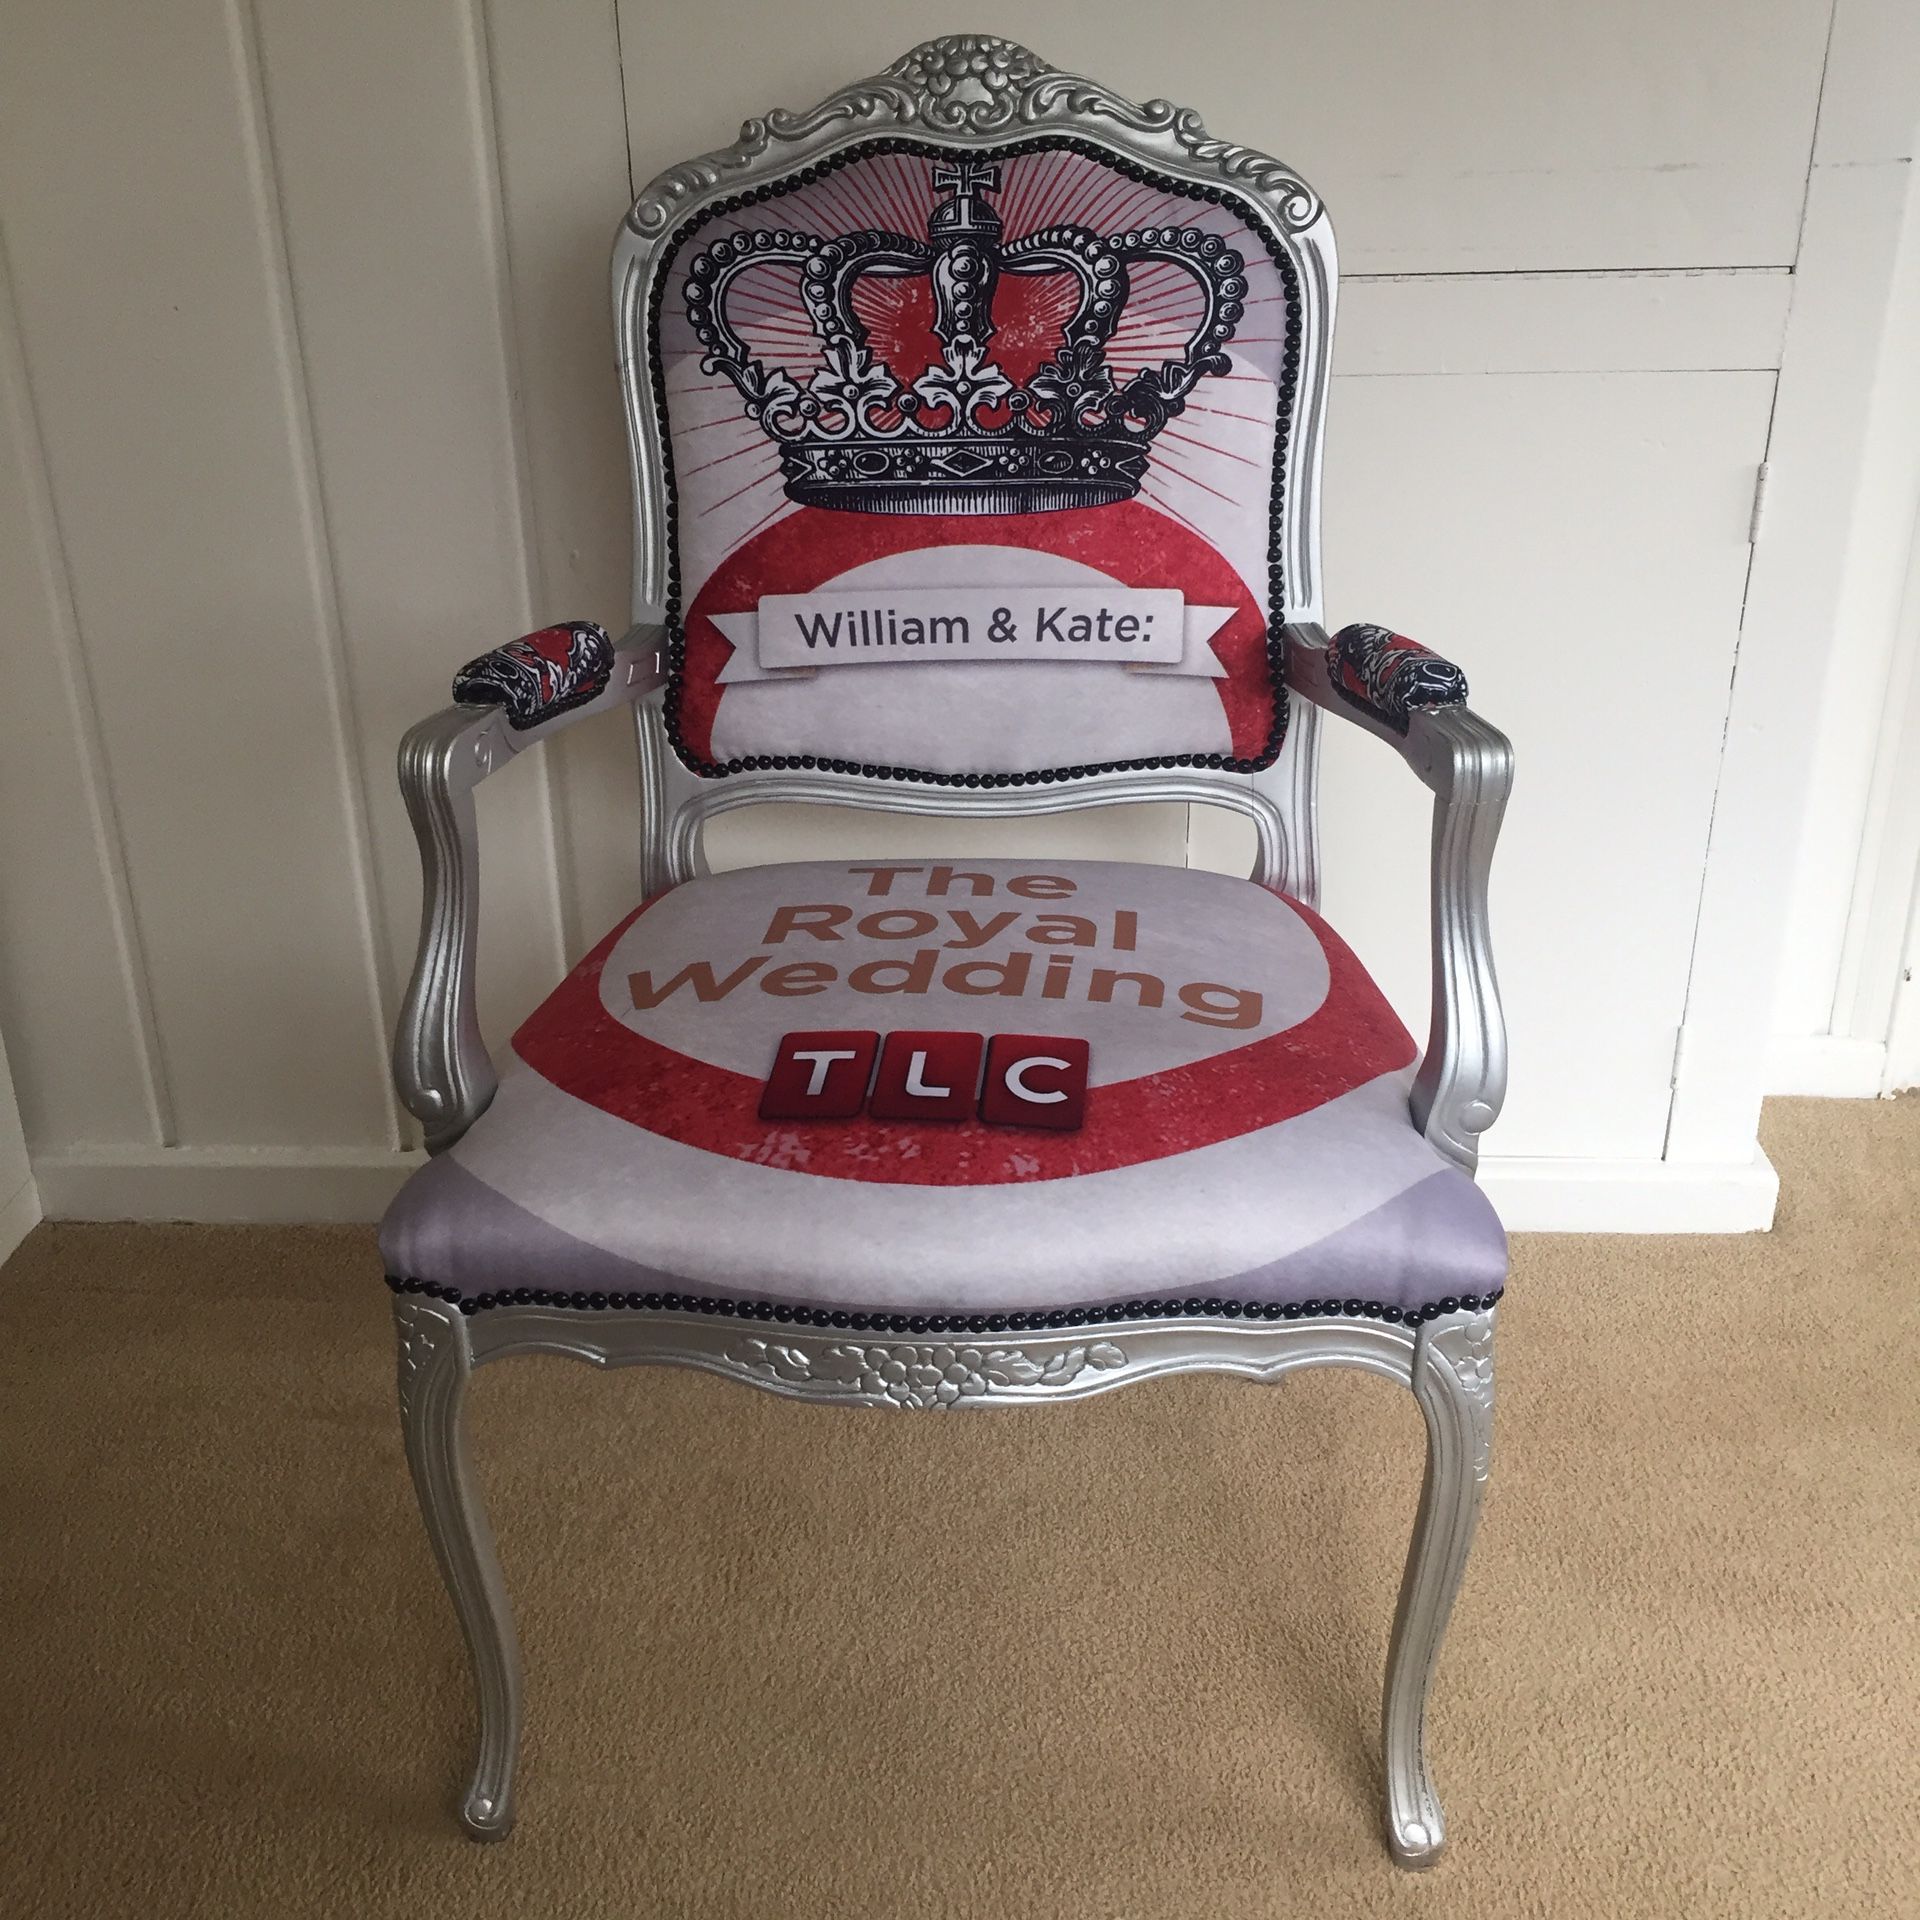 Prince William and Kate Middleton Royal wedding chair